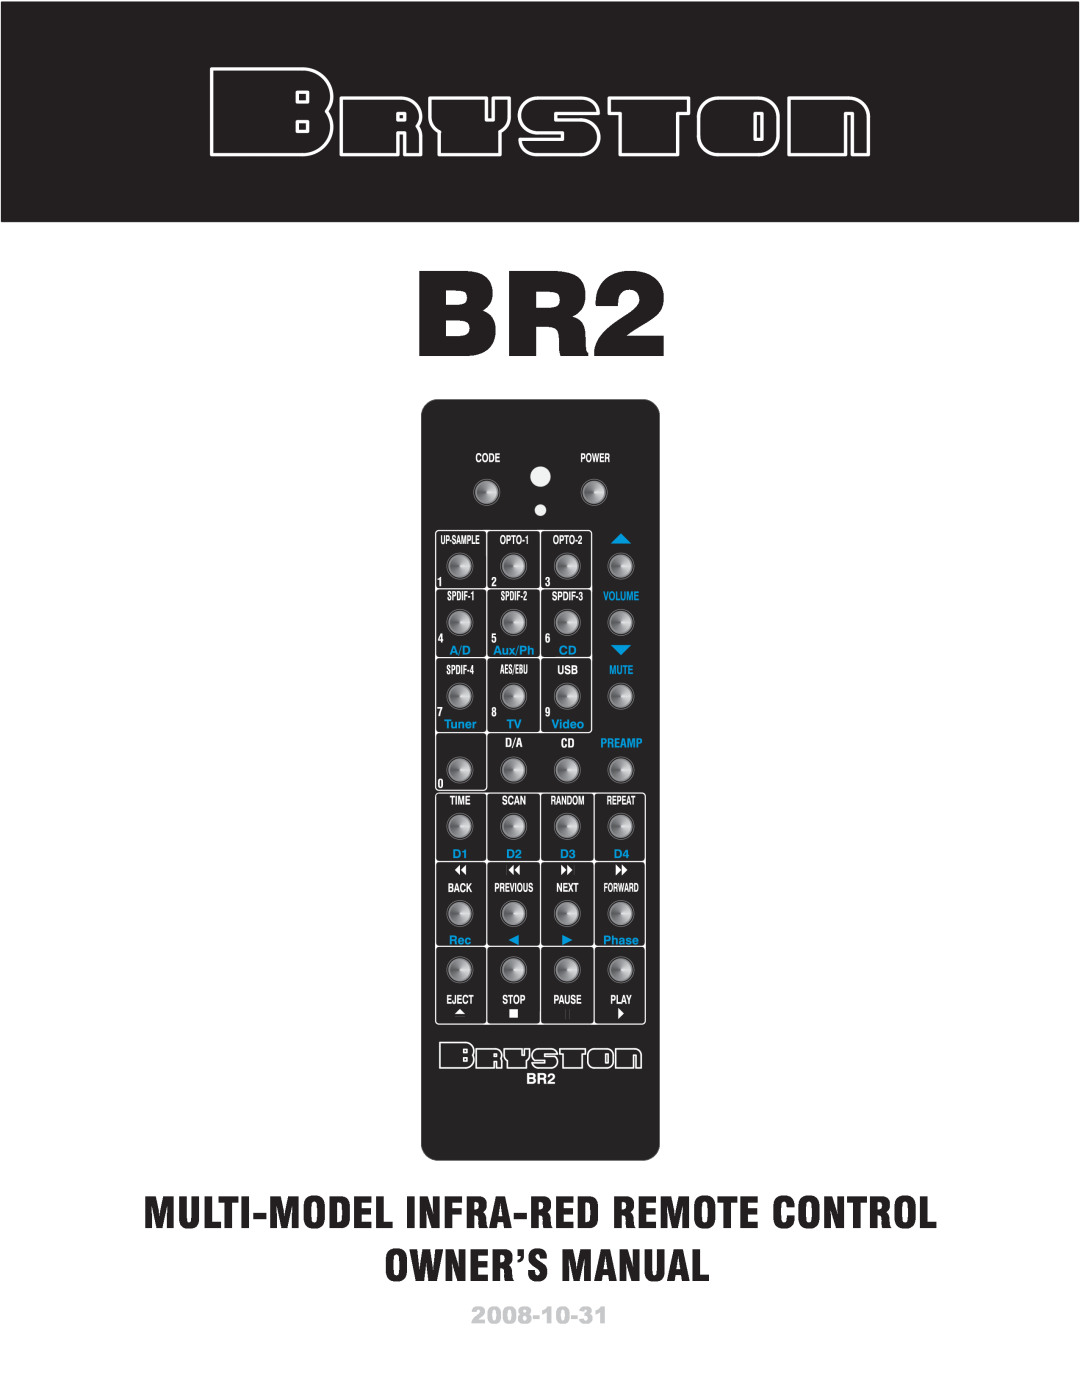 Bryston BR2 owner manual Owner’S Manual, Multi-Model Infra-Red Remote Control, 2008-10-31 